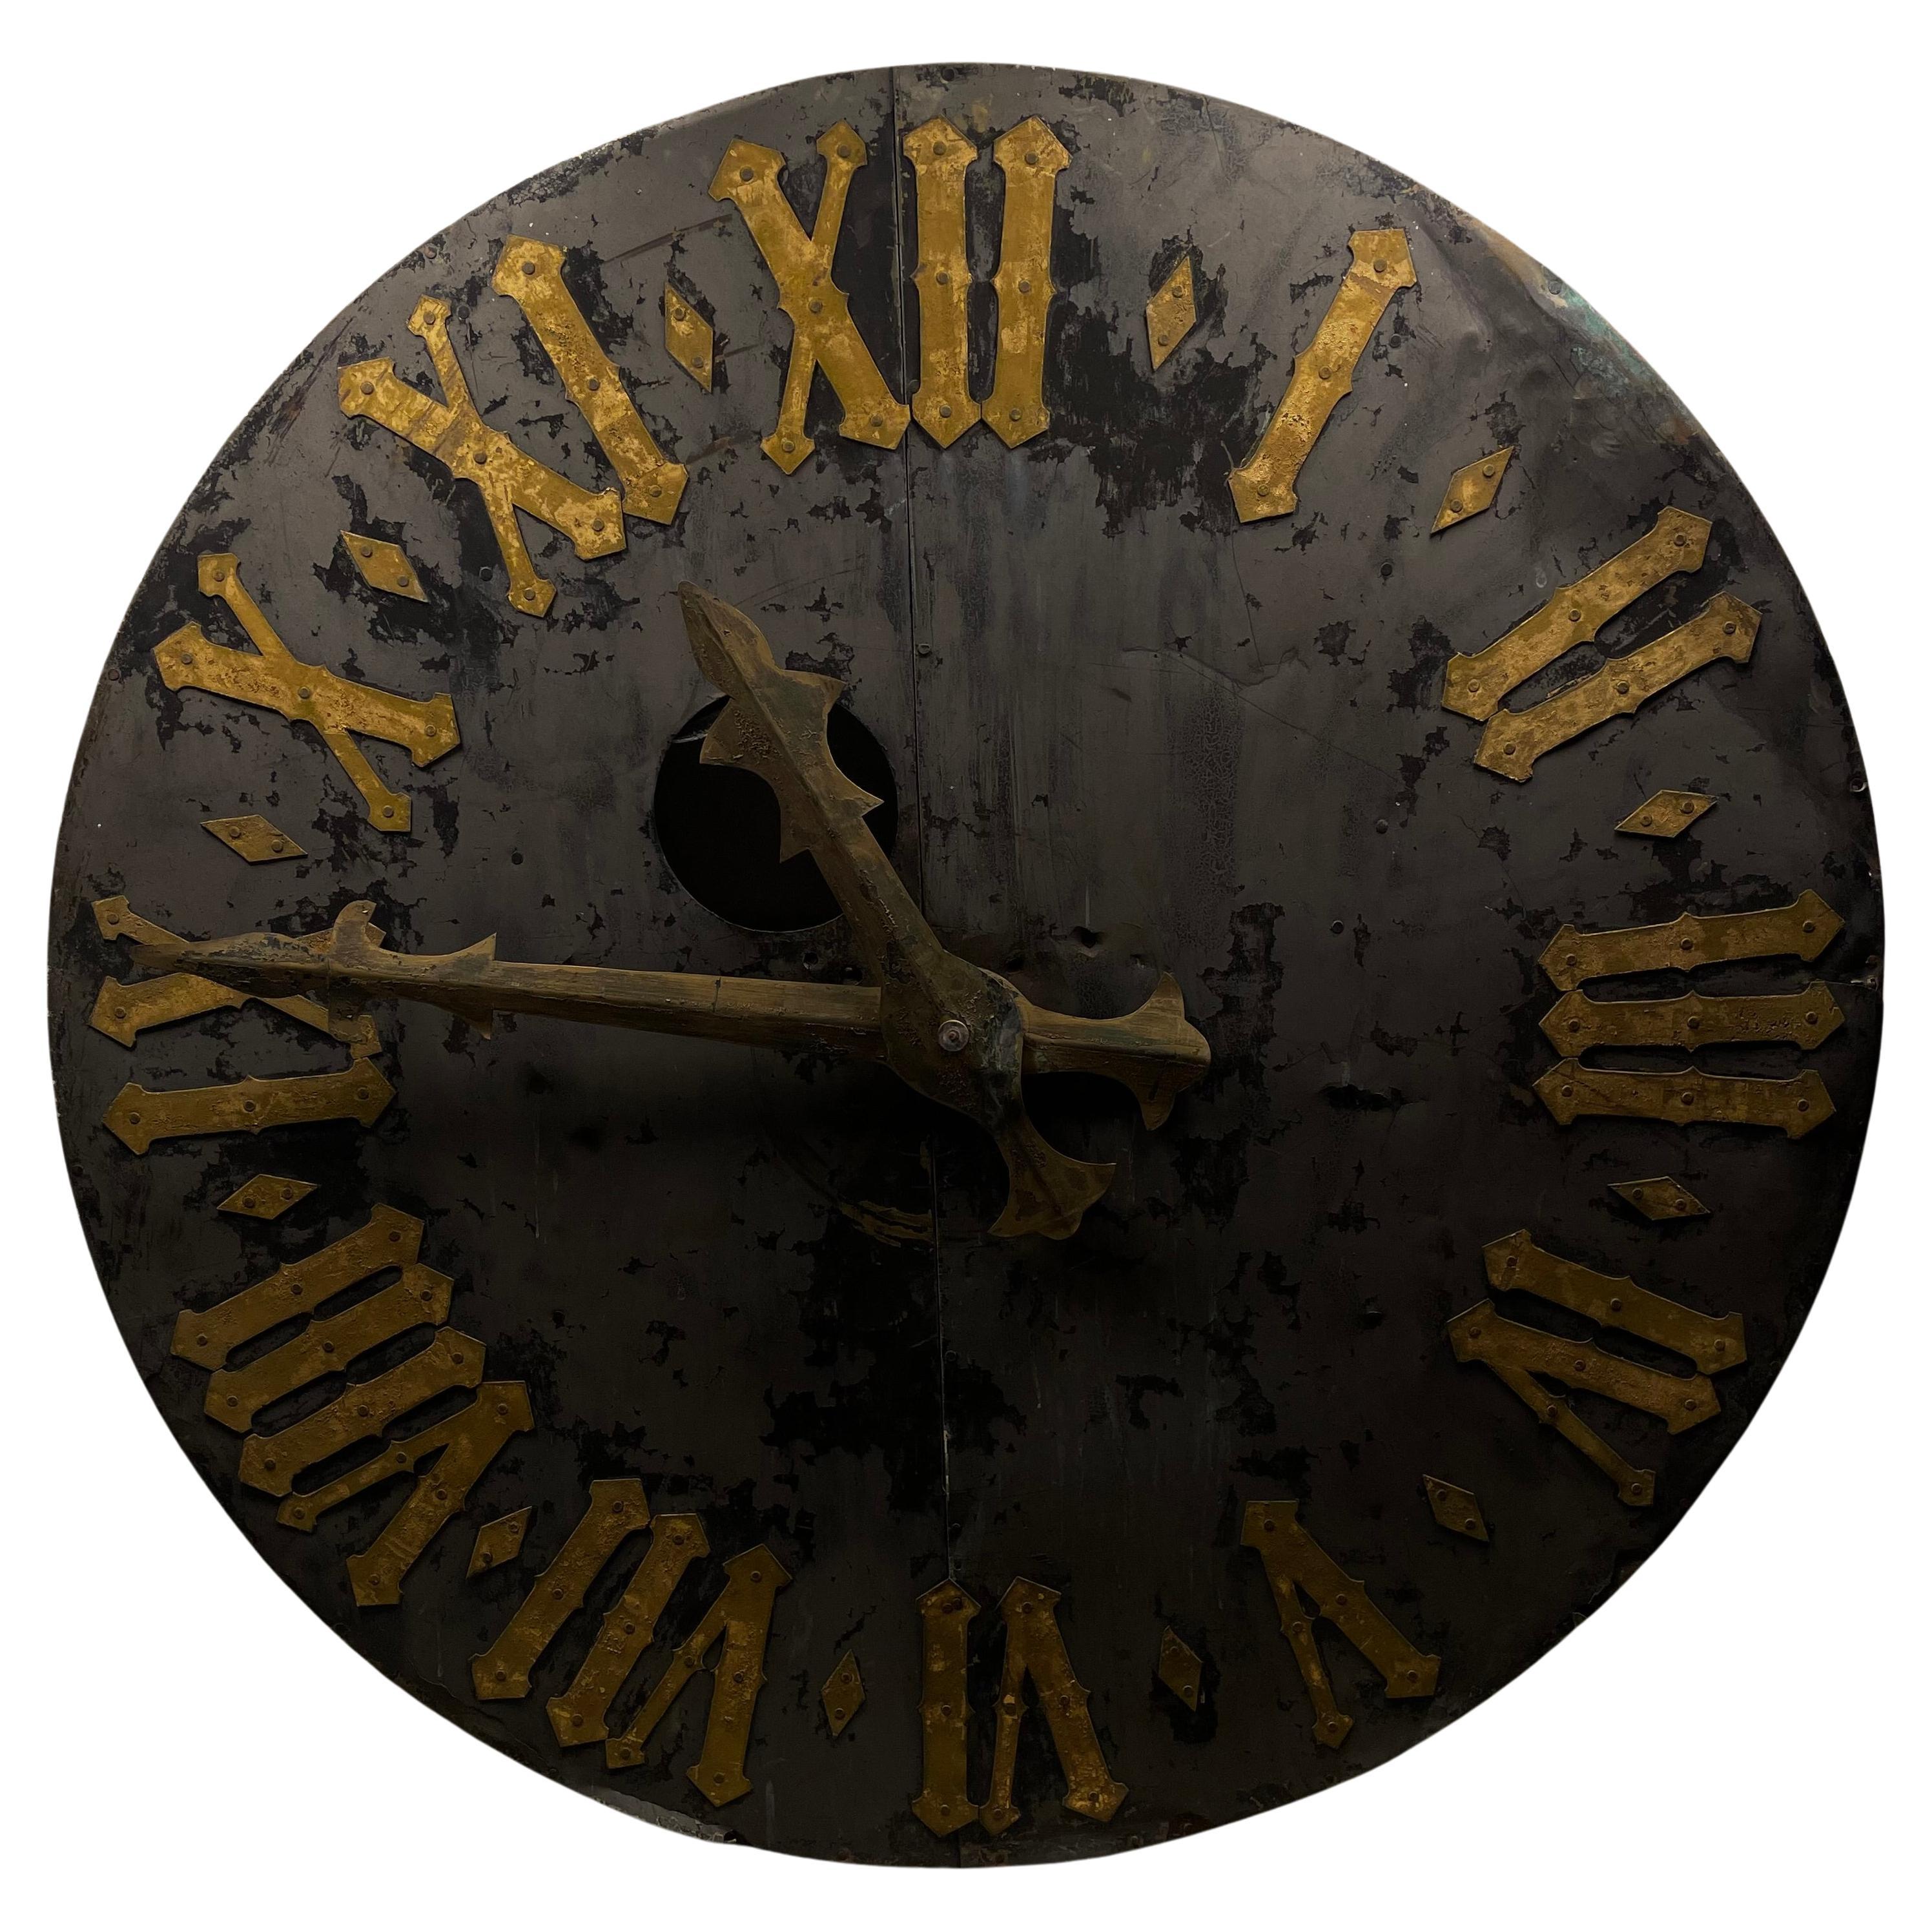 19th century French tower clock face 